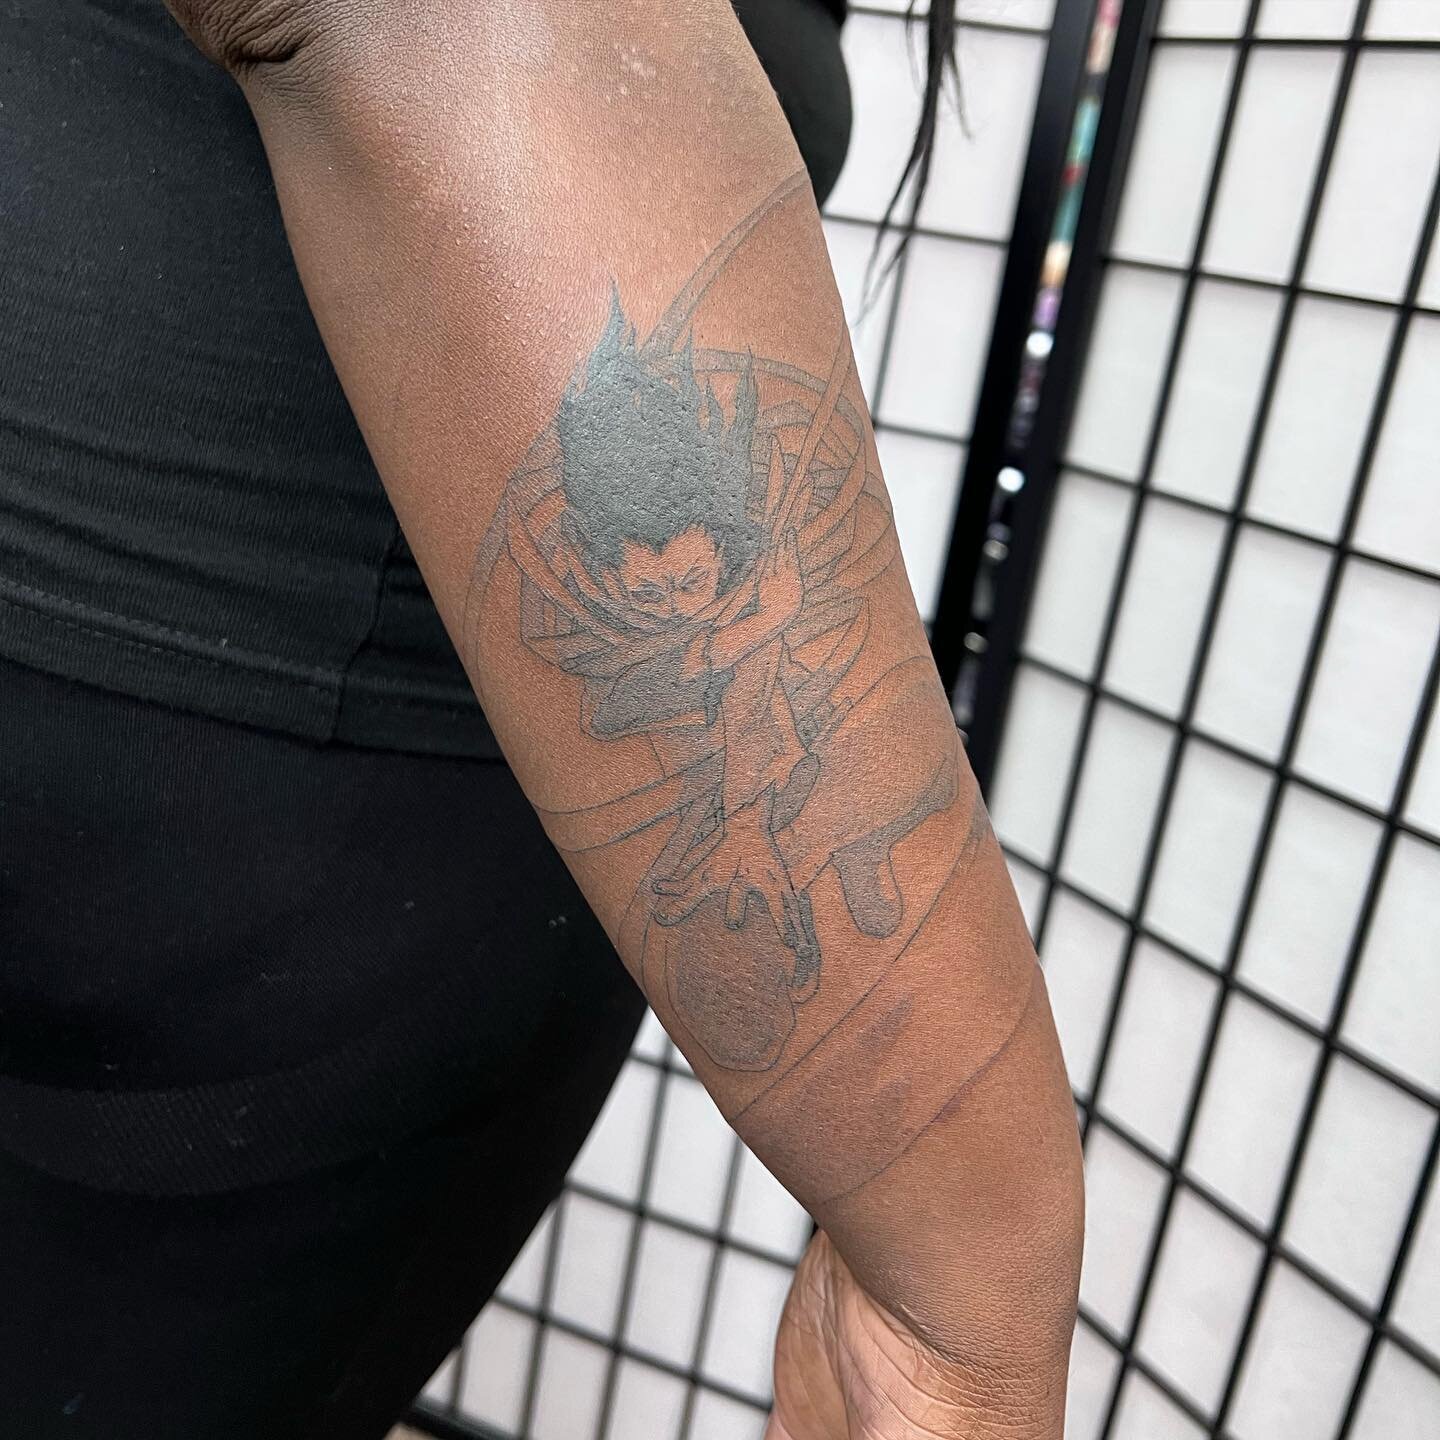 Eraser Head from My Hero Academia!! I would love to do more anime tattoos! To book, email noxsanetattoos@gmail.com ✨ #queer #queerart #queerartist #queertattooer #queertattooartist #qttr #milwaukee #milwaukeetattoo #milwaukeetattoos #milwaukeetattooa